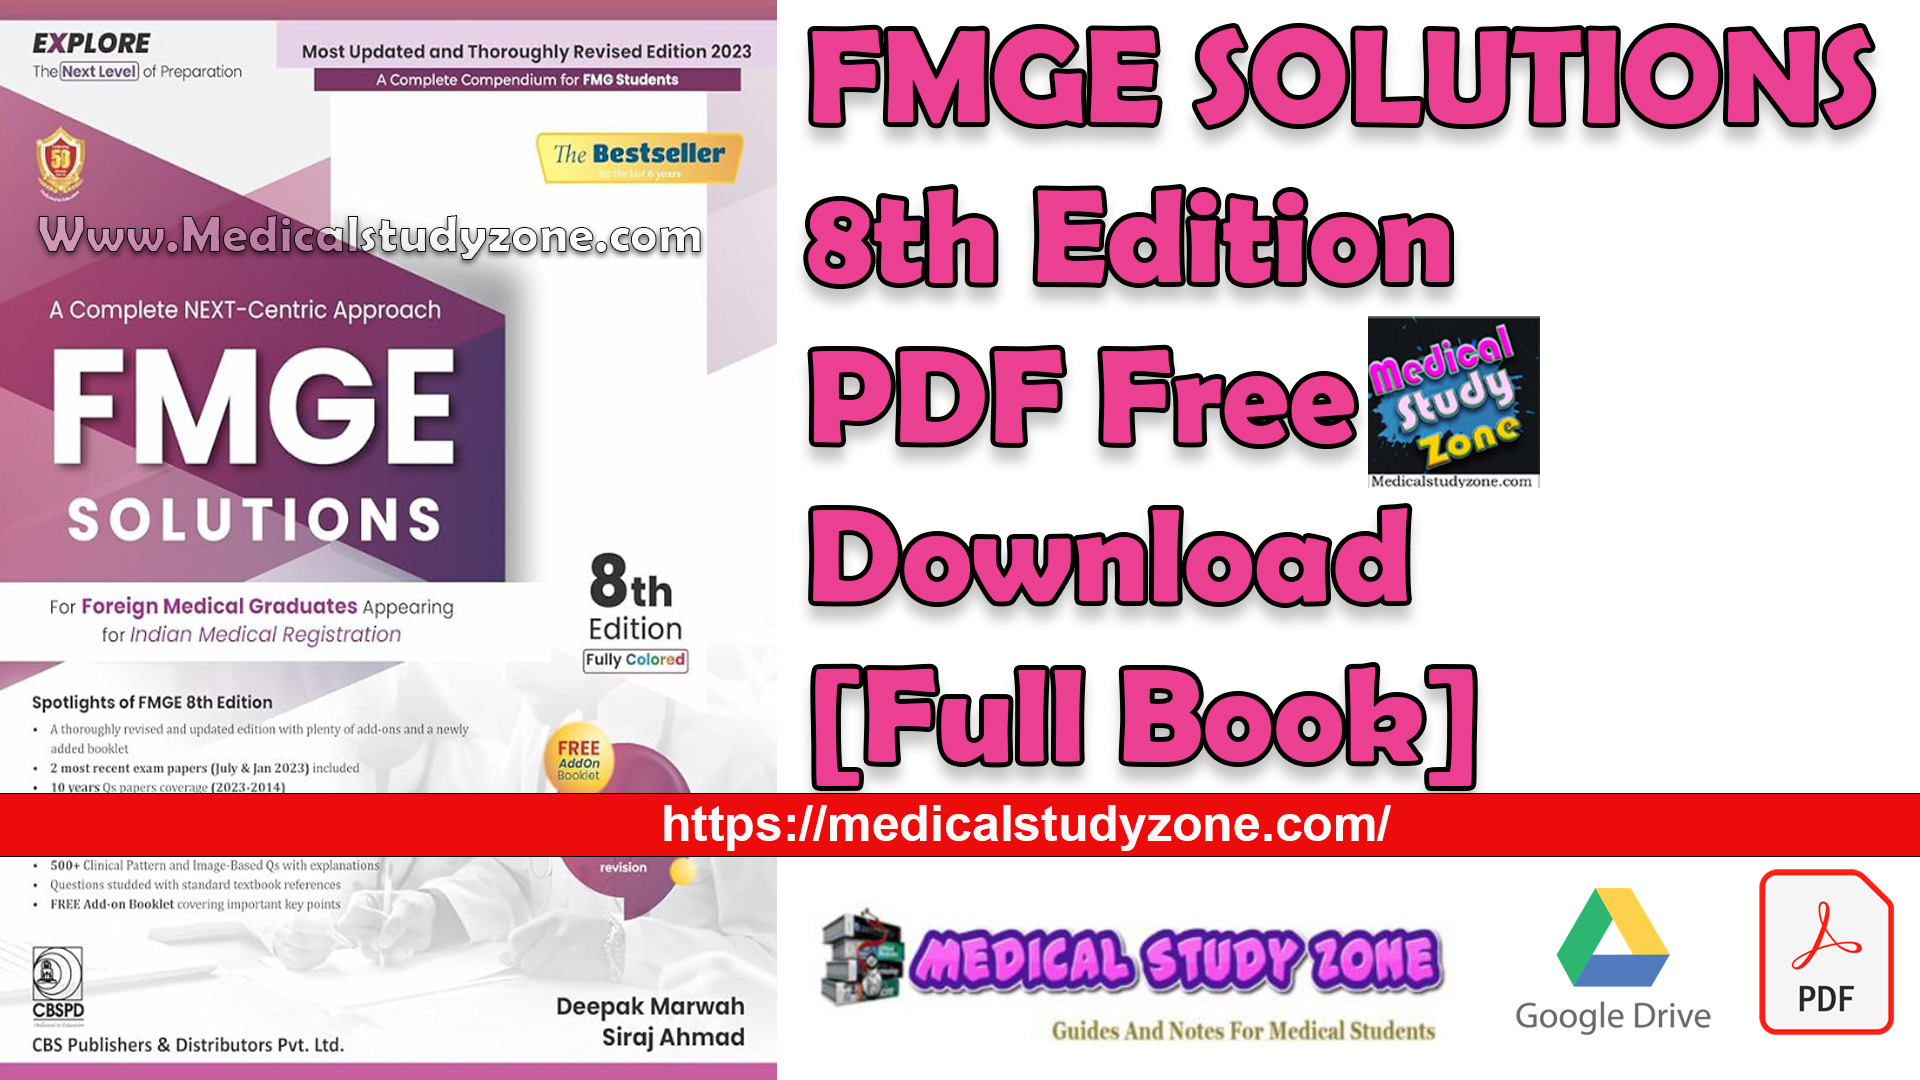 FMGE SOLUTIONS 8th Edition PDF Free Download [Full Book]